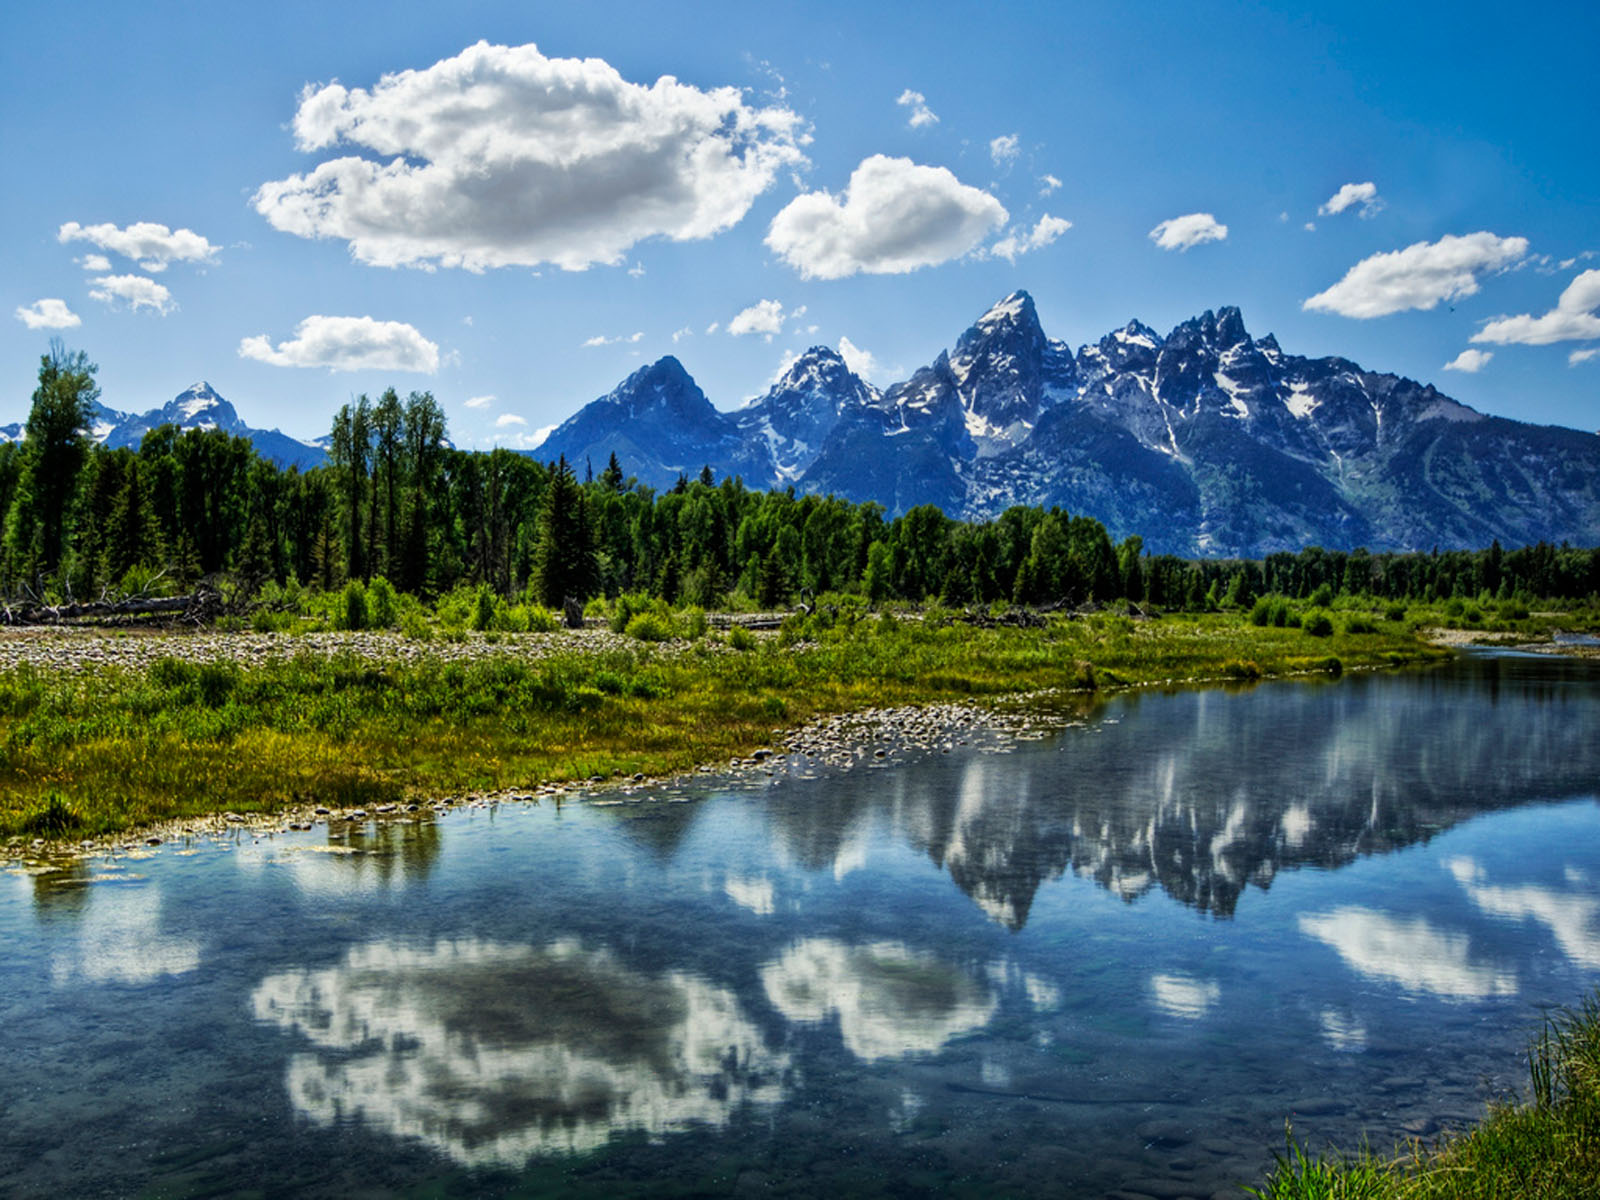 Tag Grand Teton National Park Wallpapers Backgrounds Photos Images 1600x1200